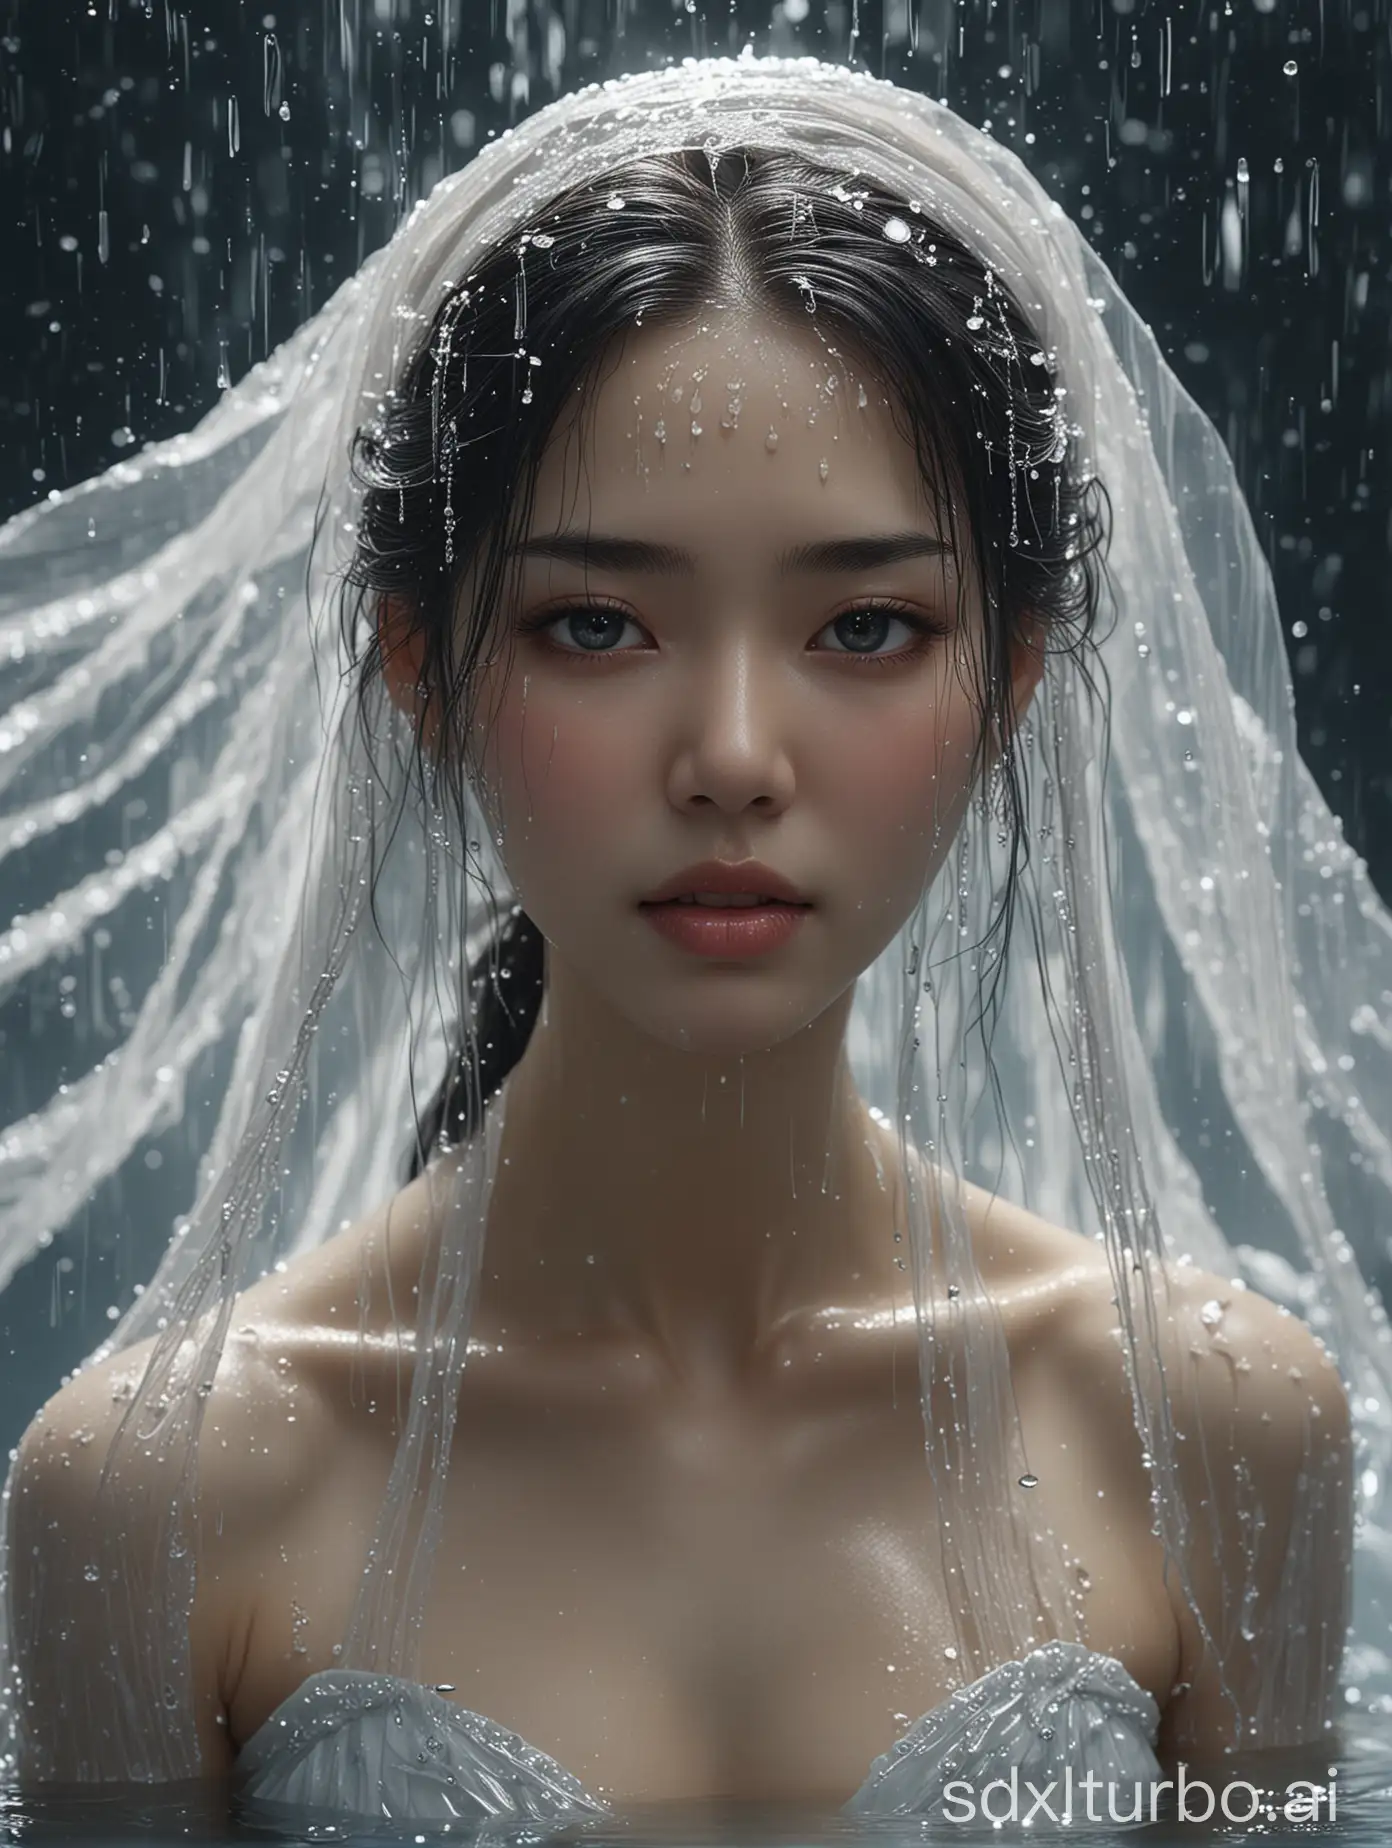 Dynamic-Pose-of-Ancient-Chinese-Beauty-in-Water-with-Sheer-Veil-Yoshitaka-Amano-and-Ross-Tran-Inspired-Art